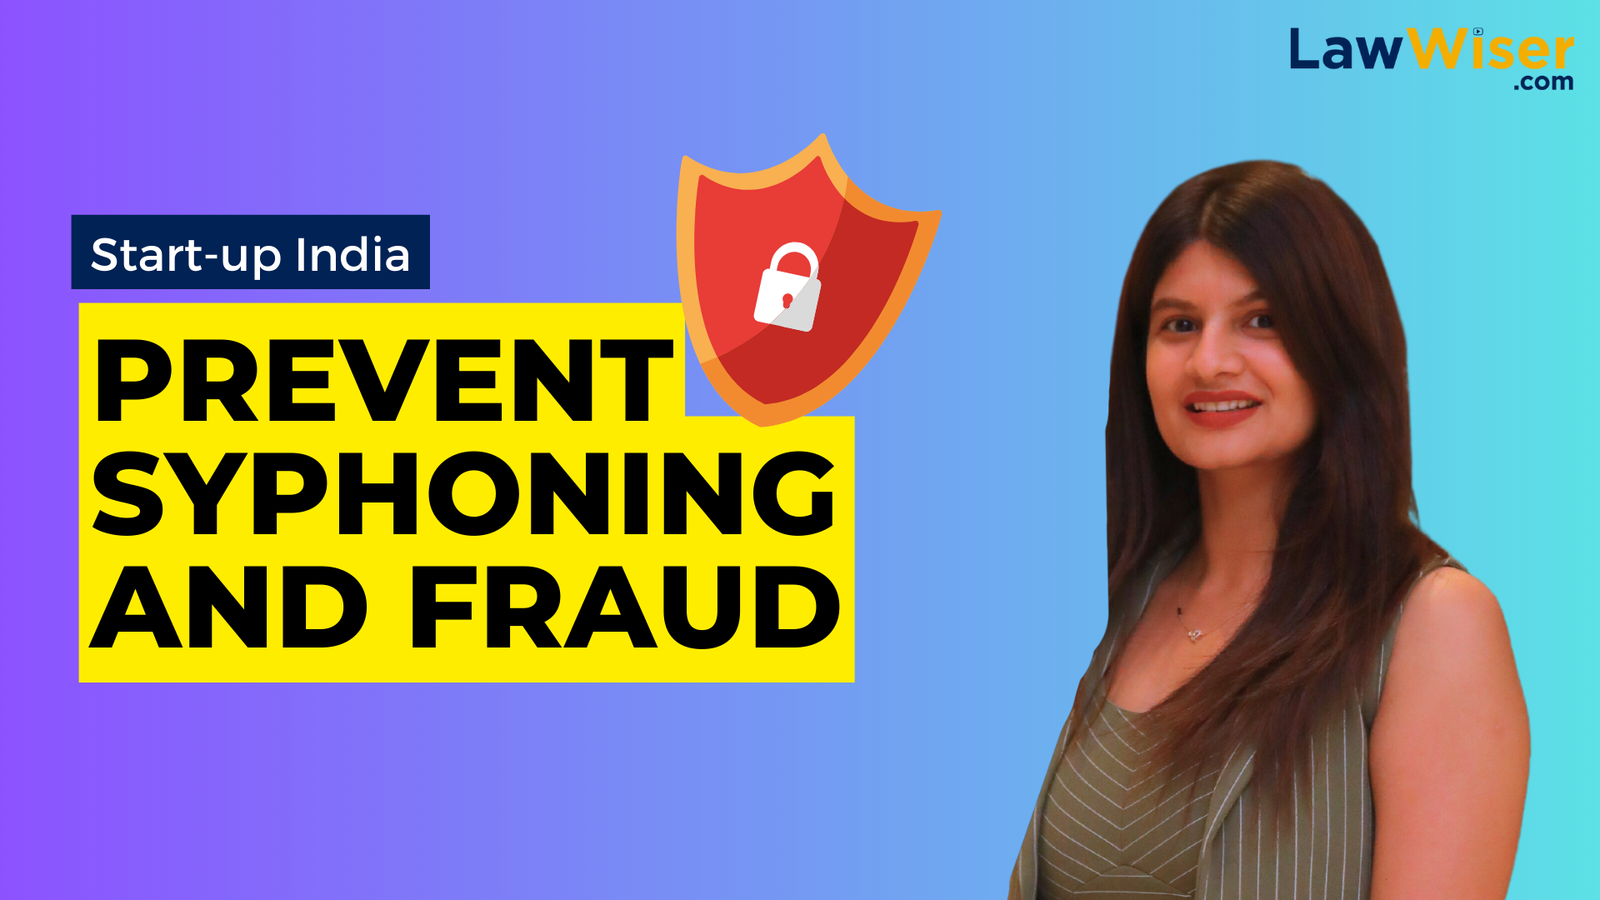 PREVENT FRAUD AND SYPHONING OF FUNDS